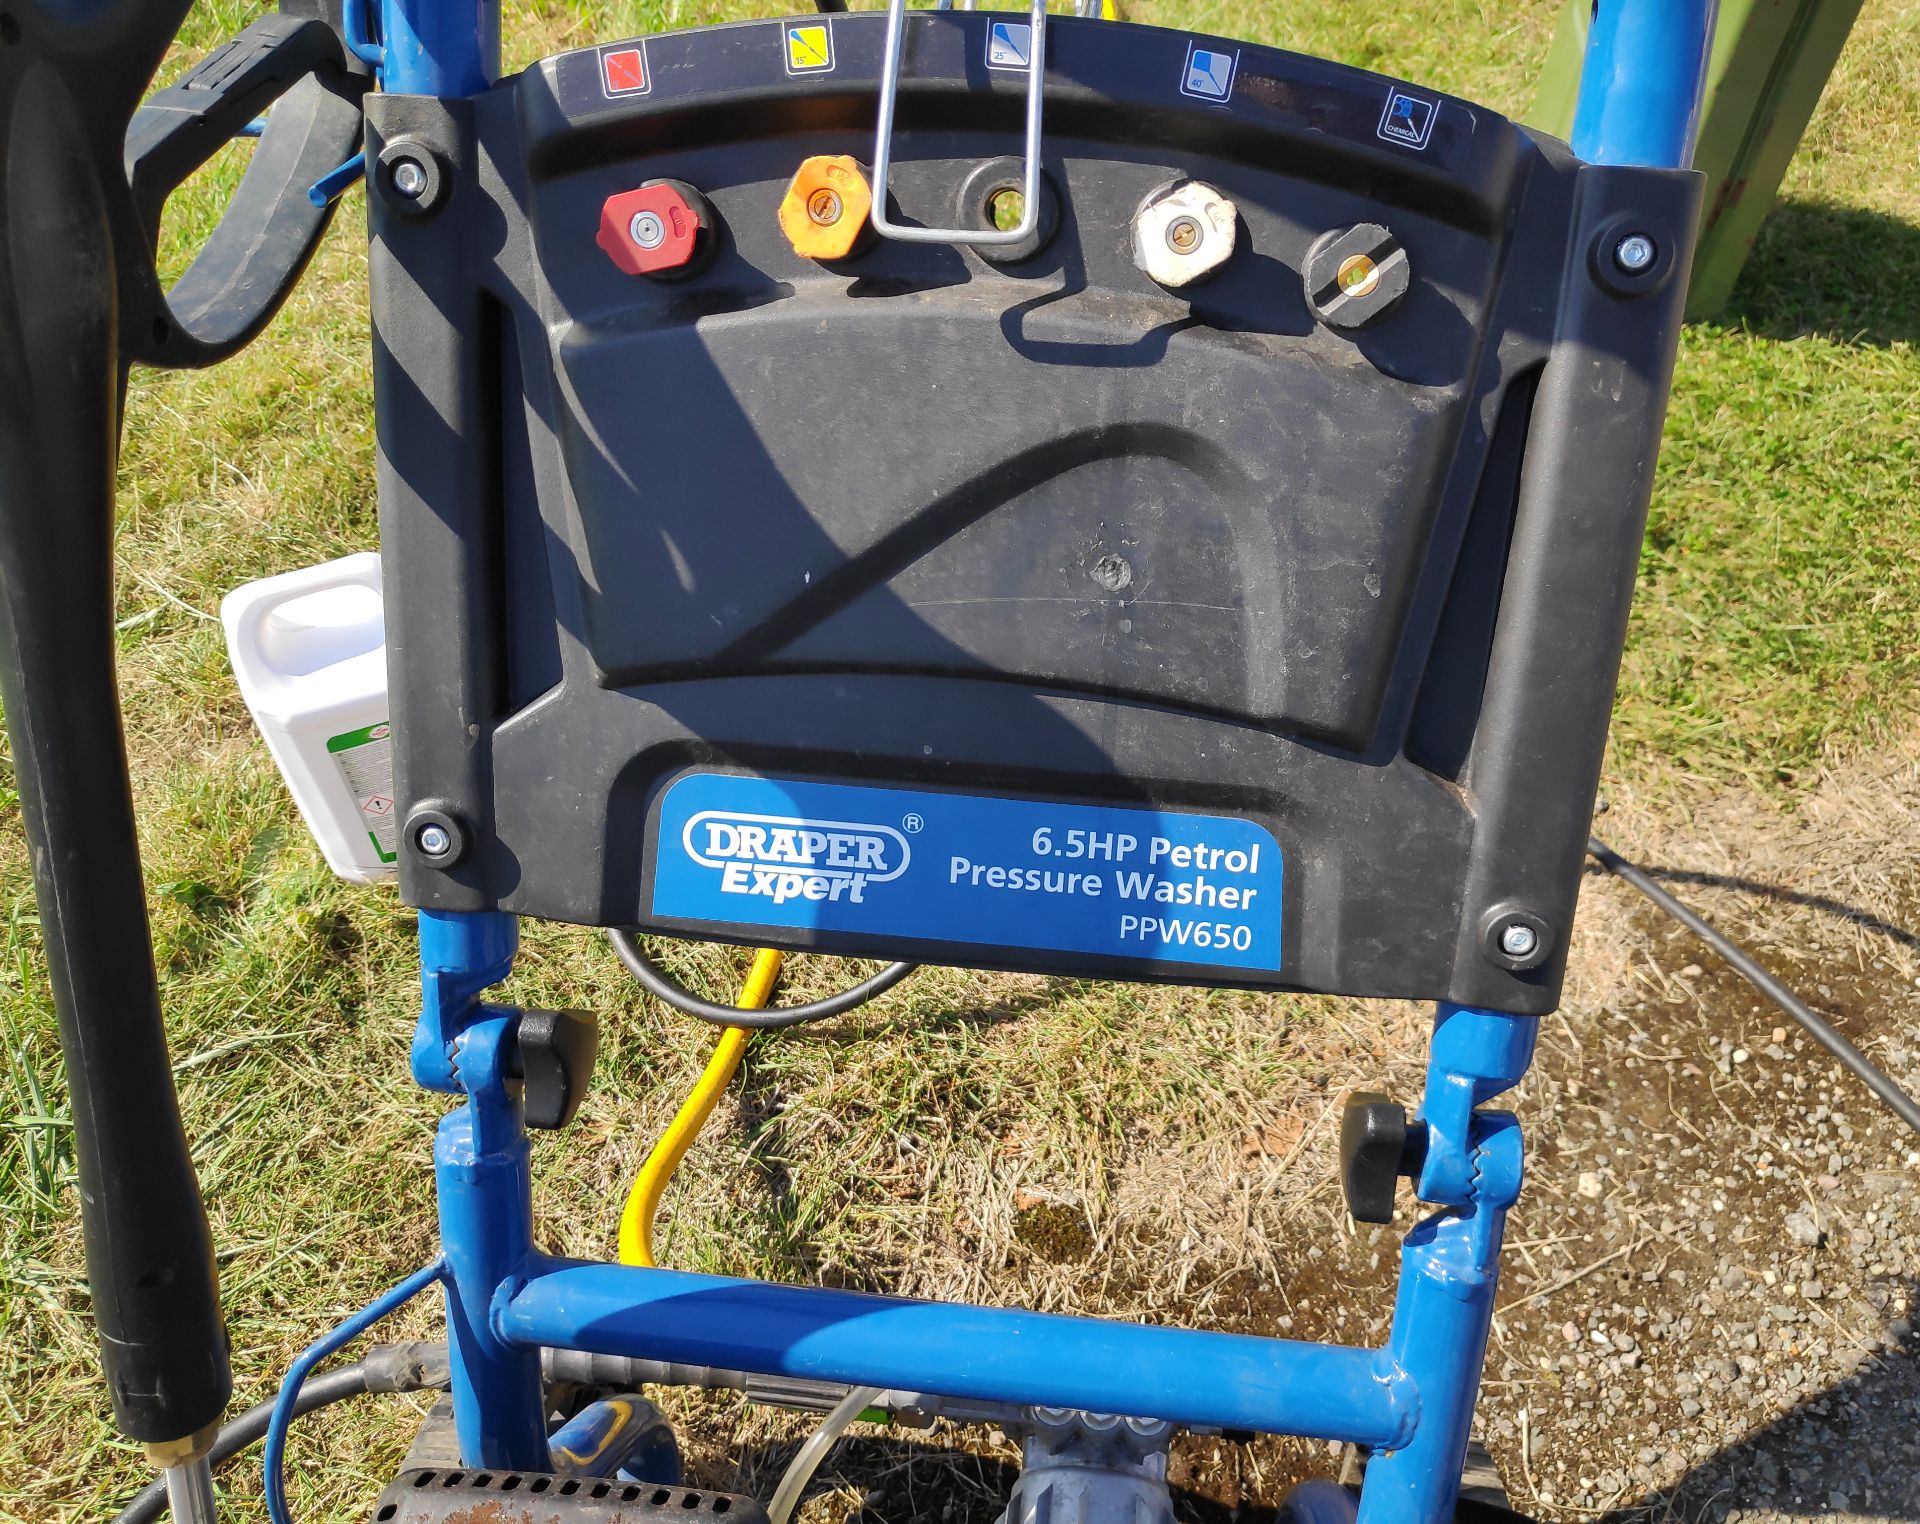 1 x Draper Expert 6.5Hp Petrol Pressure Washer PPW650 - CL682 - Location: Bedford NN29 - Image 3 of 10